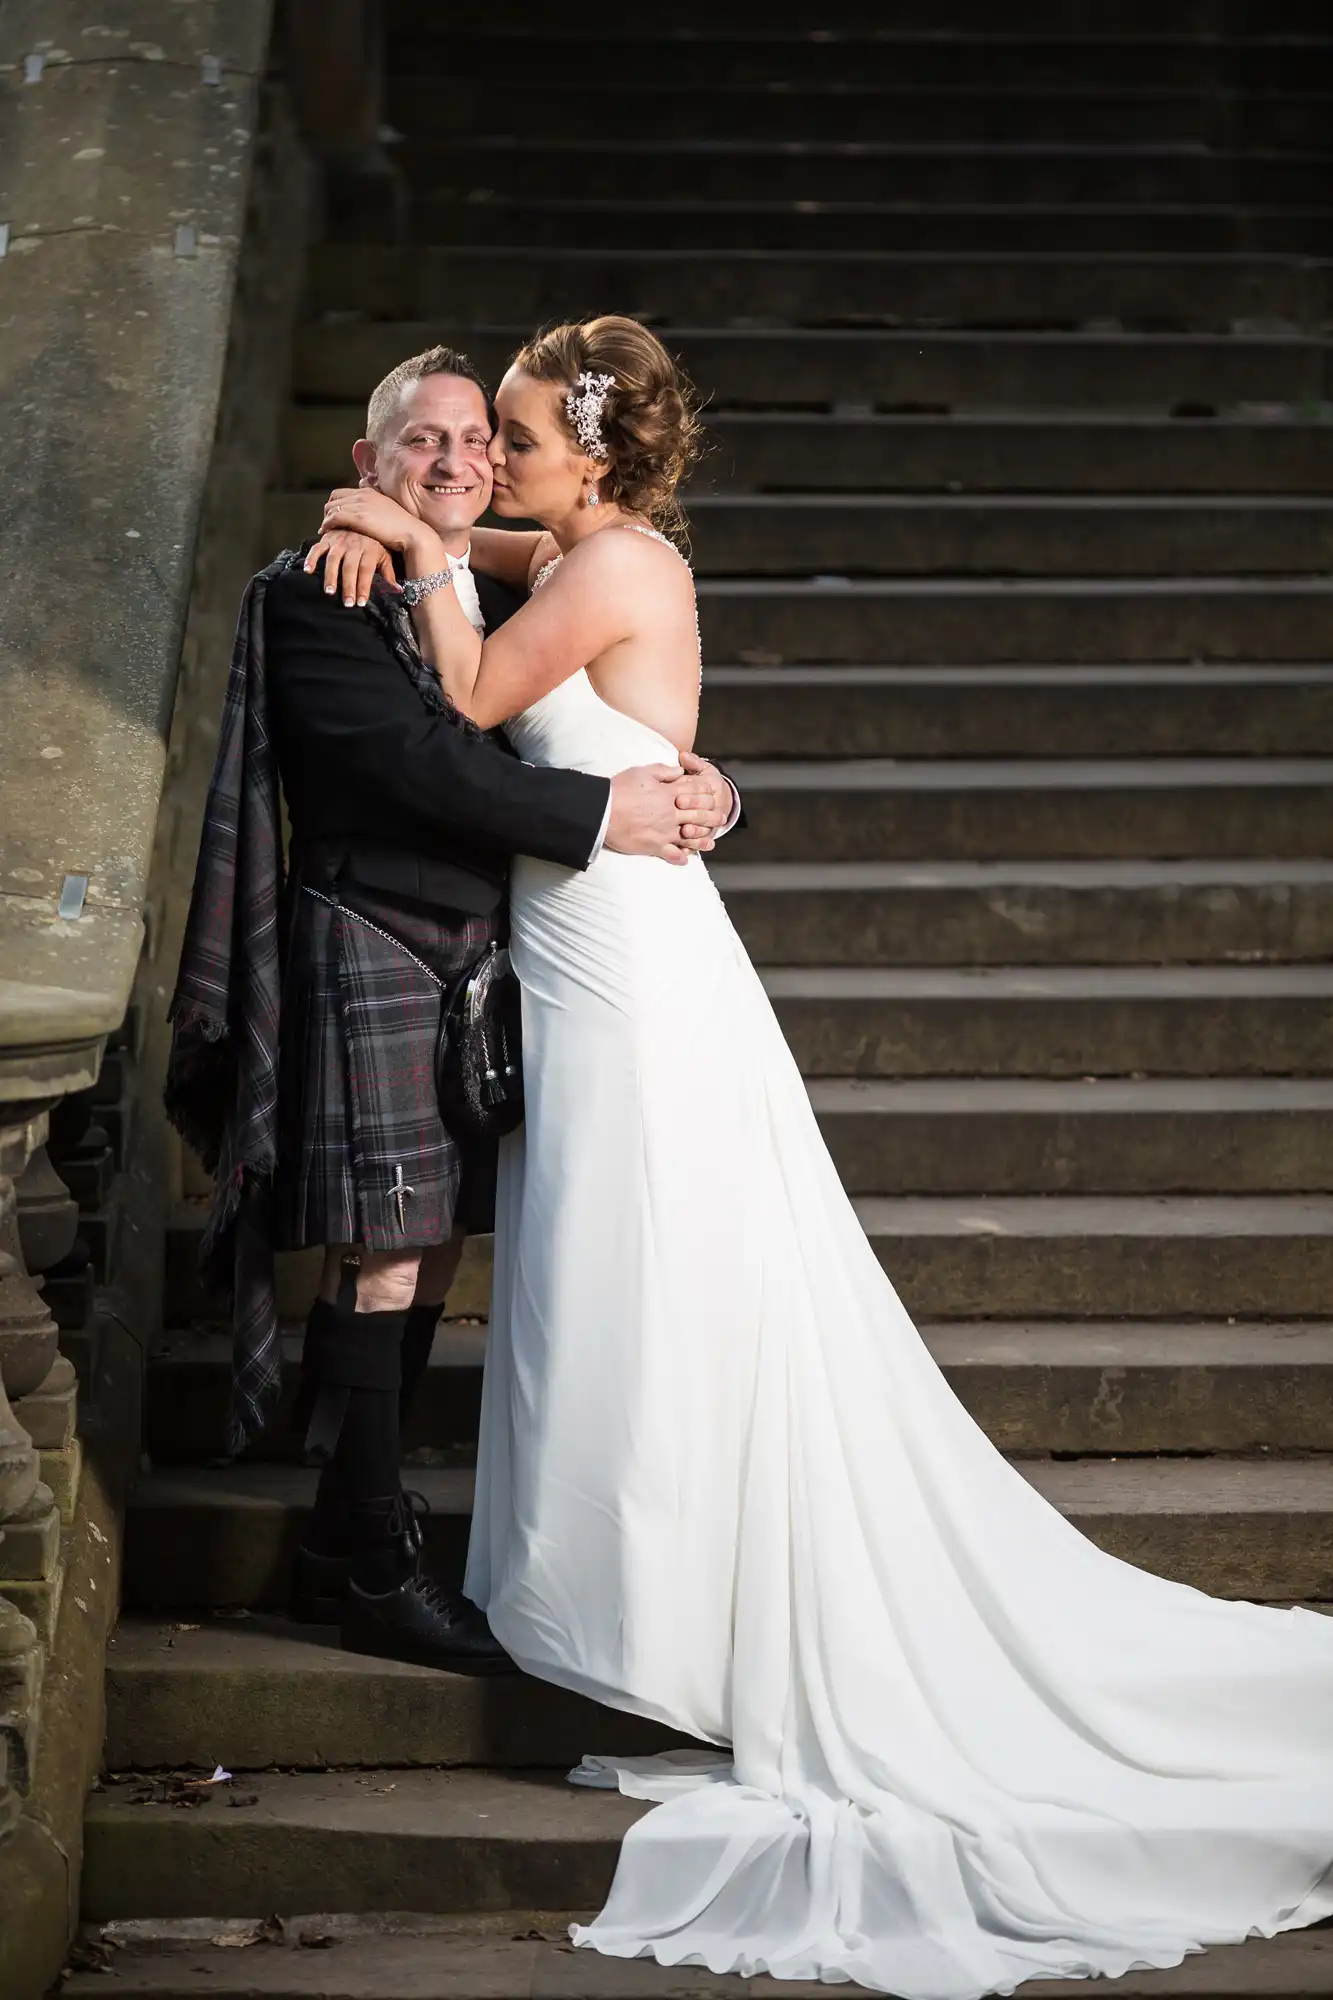 A newly married couple embracing on stone stairs, the groom in a kilt and the bride in a white gown with a long train.